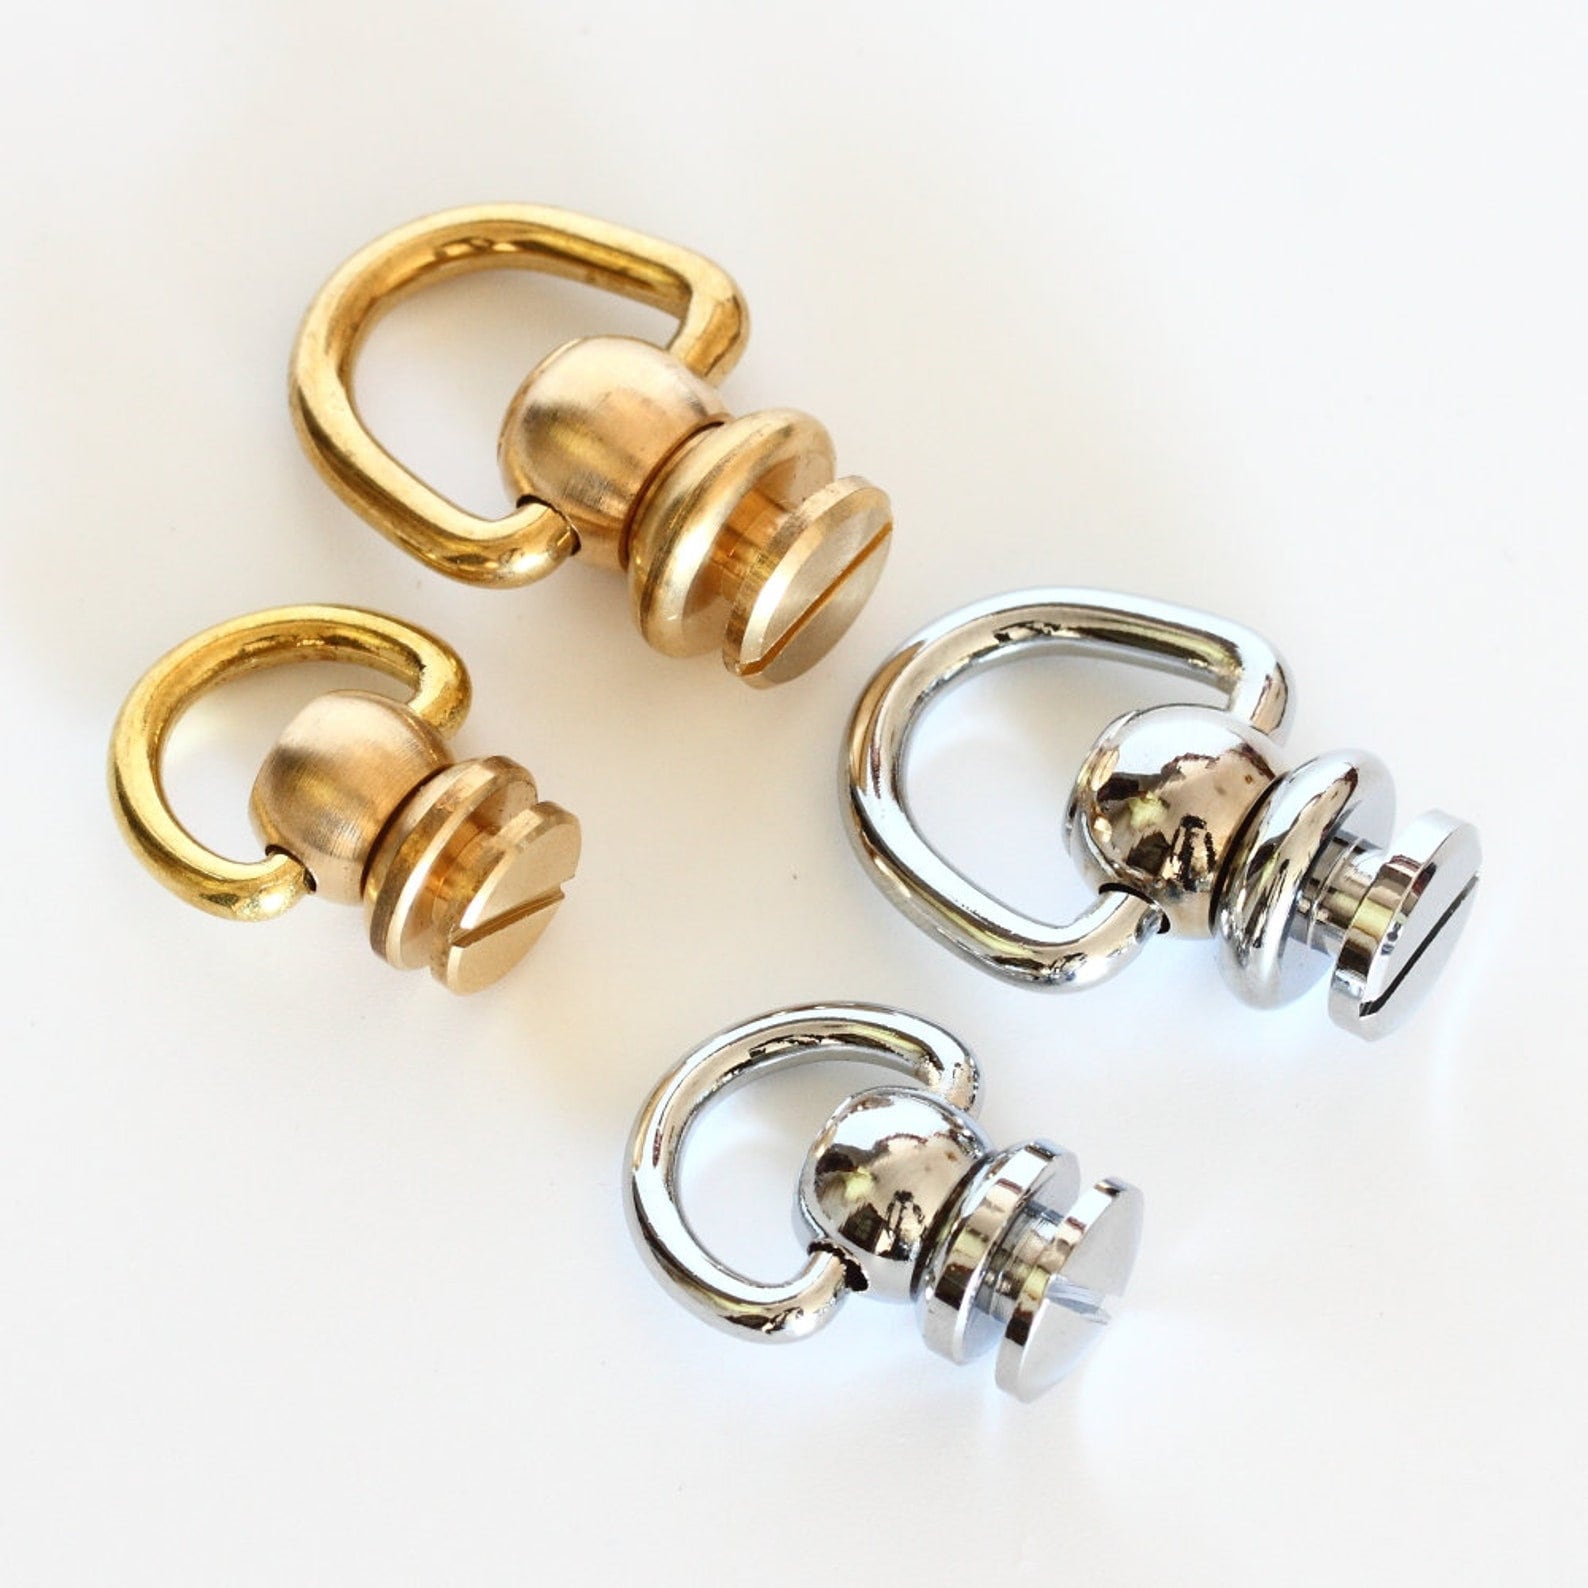 ELANE 40 Pcs D Rings for Purse,Screw Rivets for Leather Crafting,Wallet  Conversion Kit (Black+Silver+Gold+Light Gold)